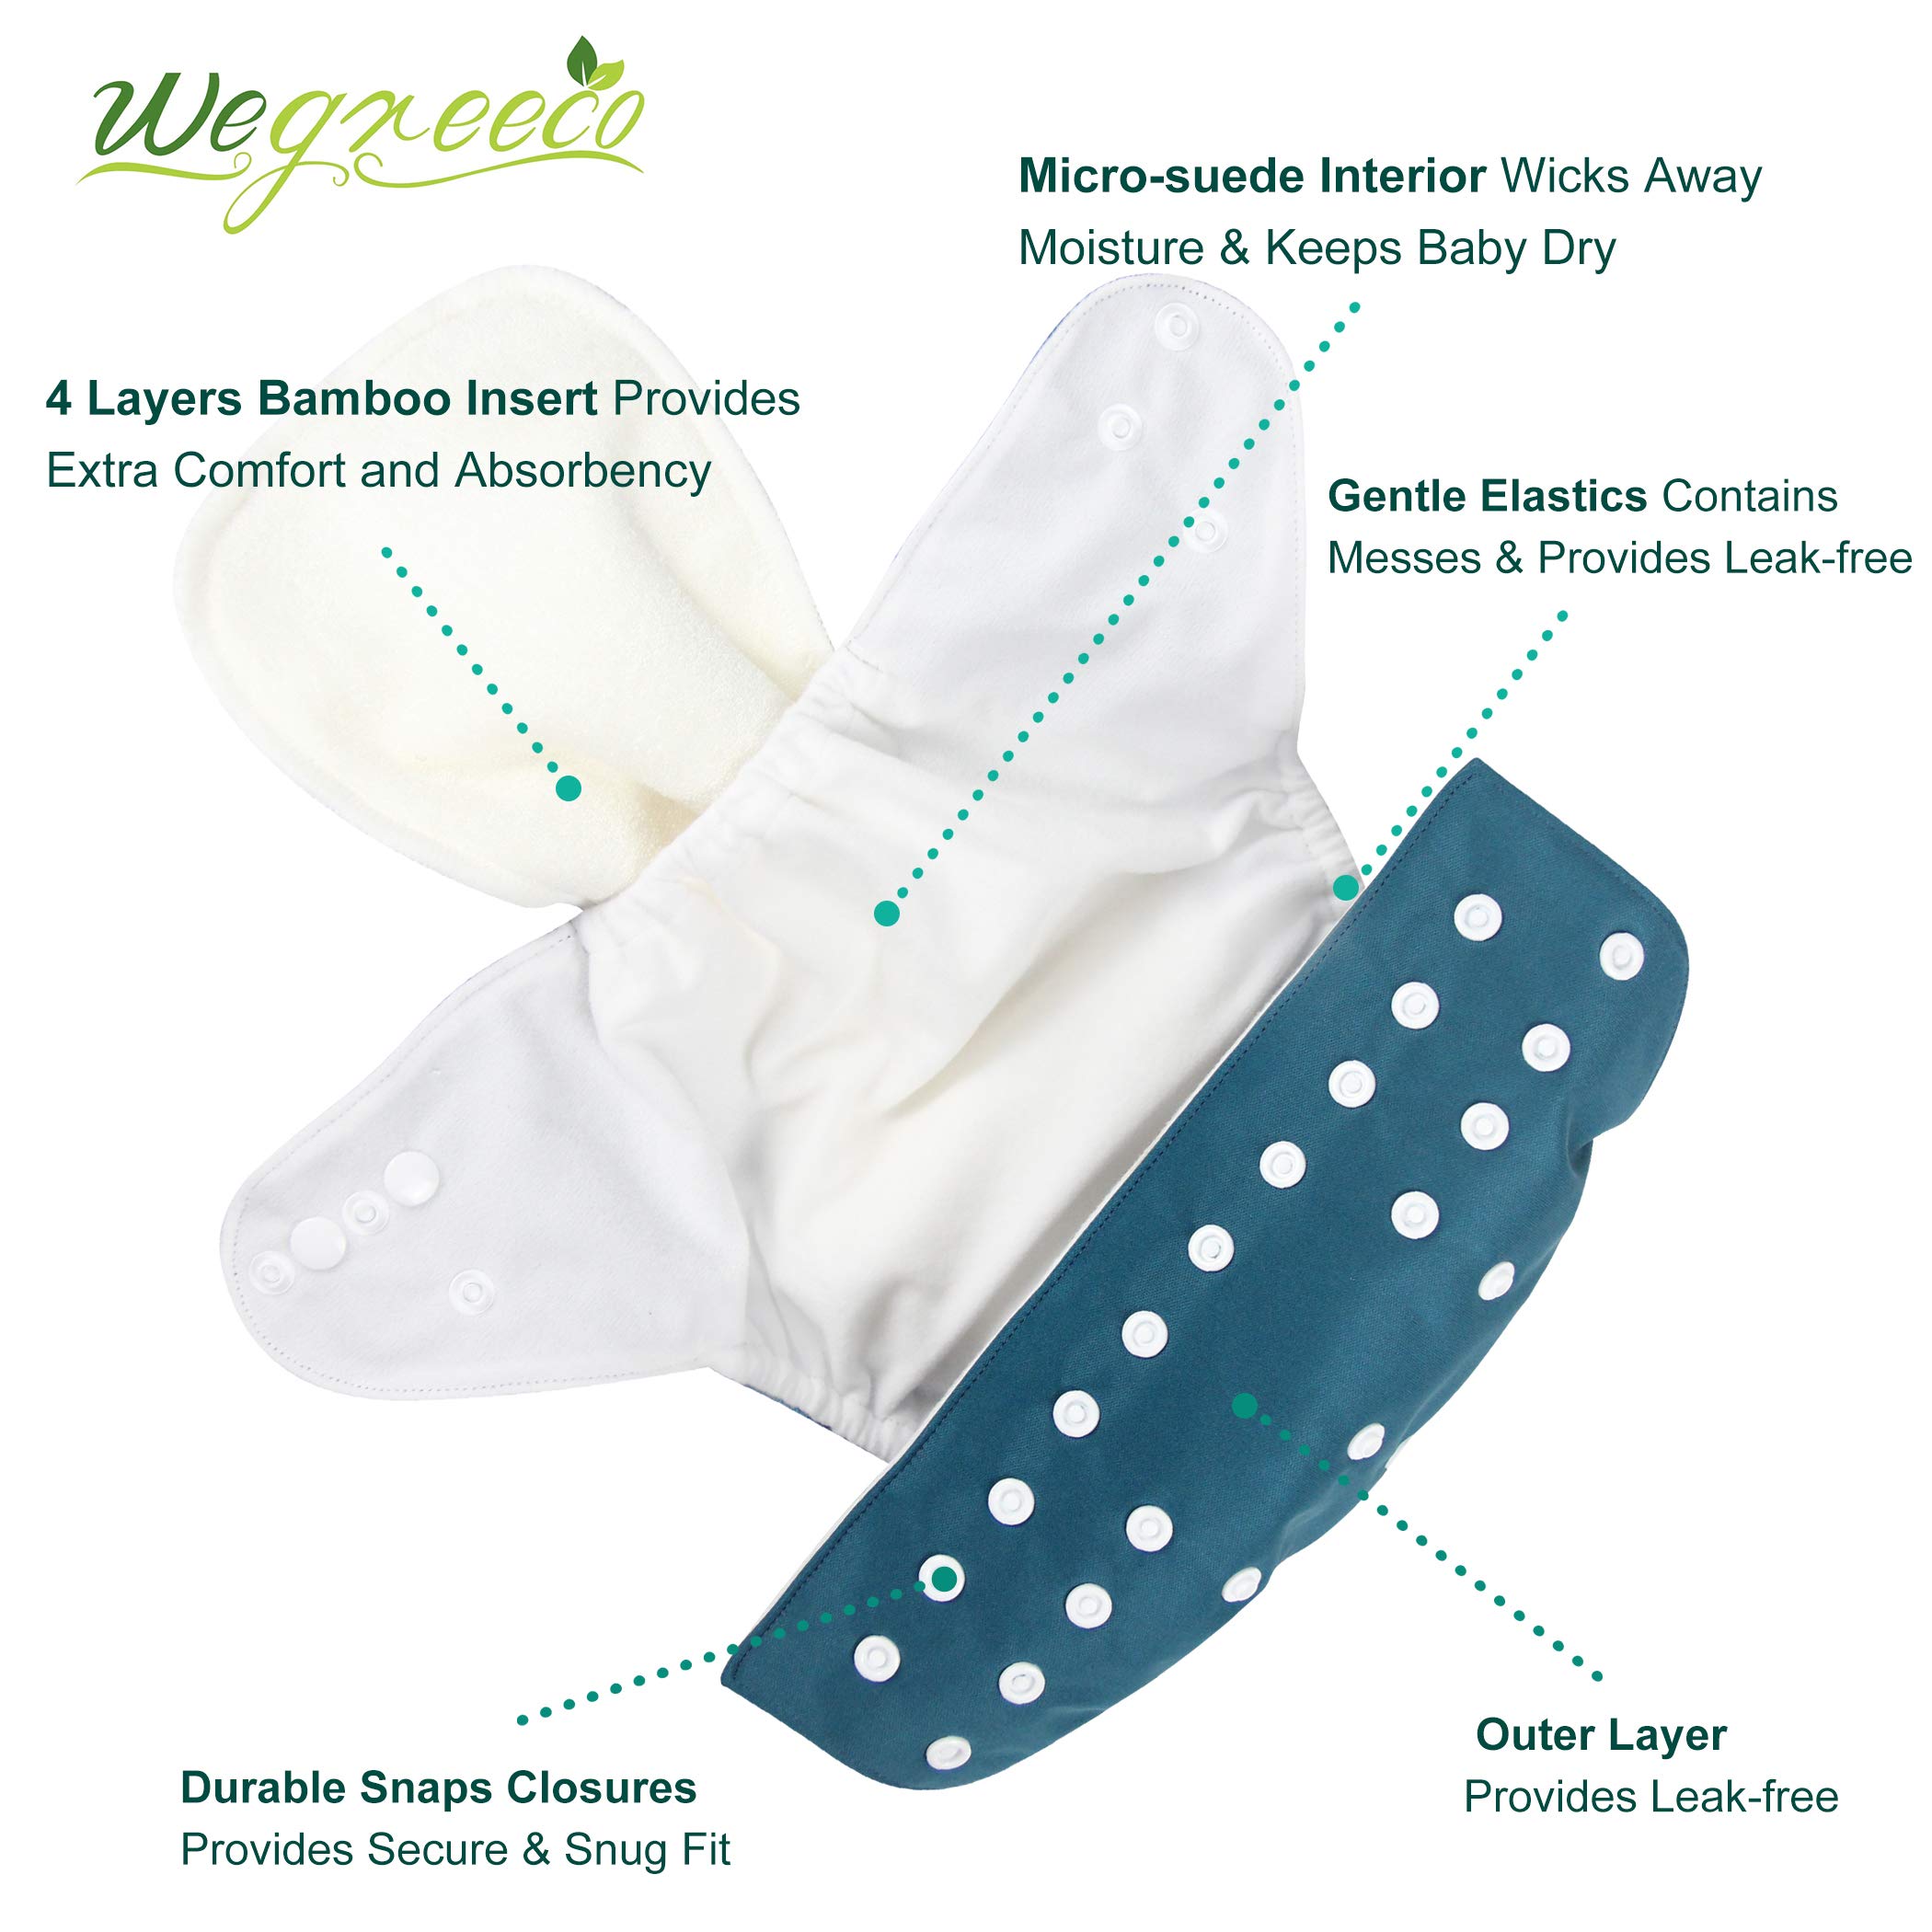 wegreeco Washable Reusable Baby Cloth Pocket Diapers 6 Pack + 6 Bamboo Inserts (with 1 Wet Bag, Boy Prints 02)